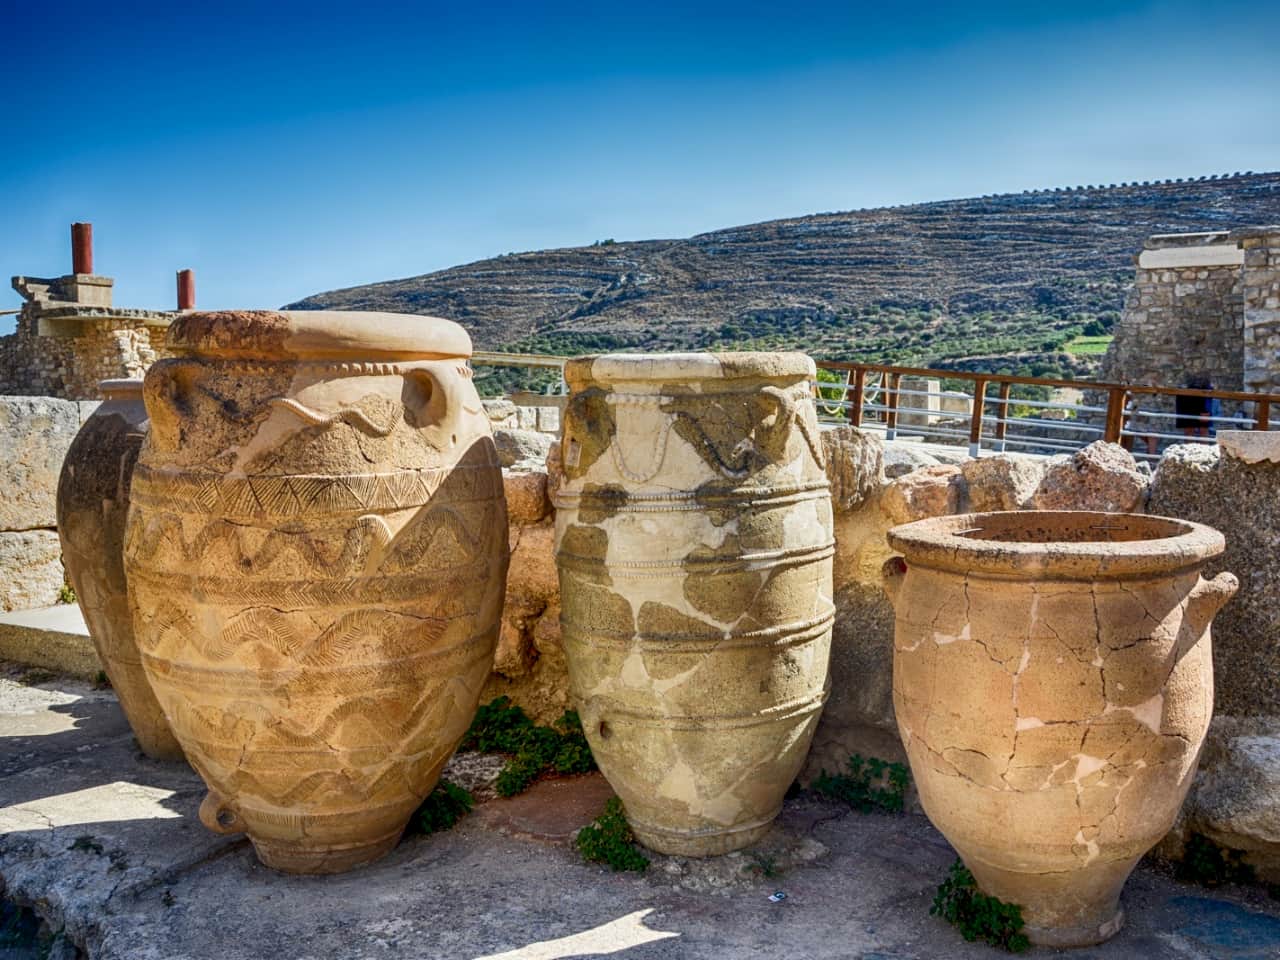 Shore Excursion Heraklion Knossos Palace & Museum, shore excursion iraklion crete knossos museum, best cultural tour heraklion crete, tour with transfer knossos archaeological museum, expert local guide professional and licensed, cruise ship excursion